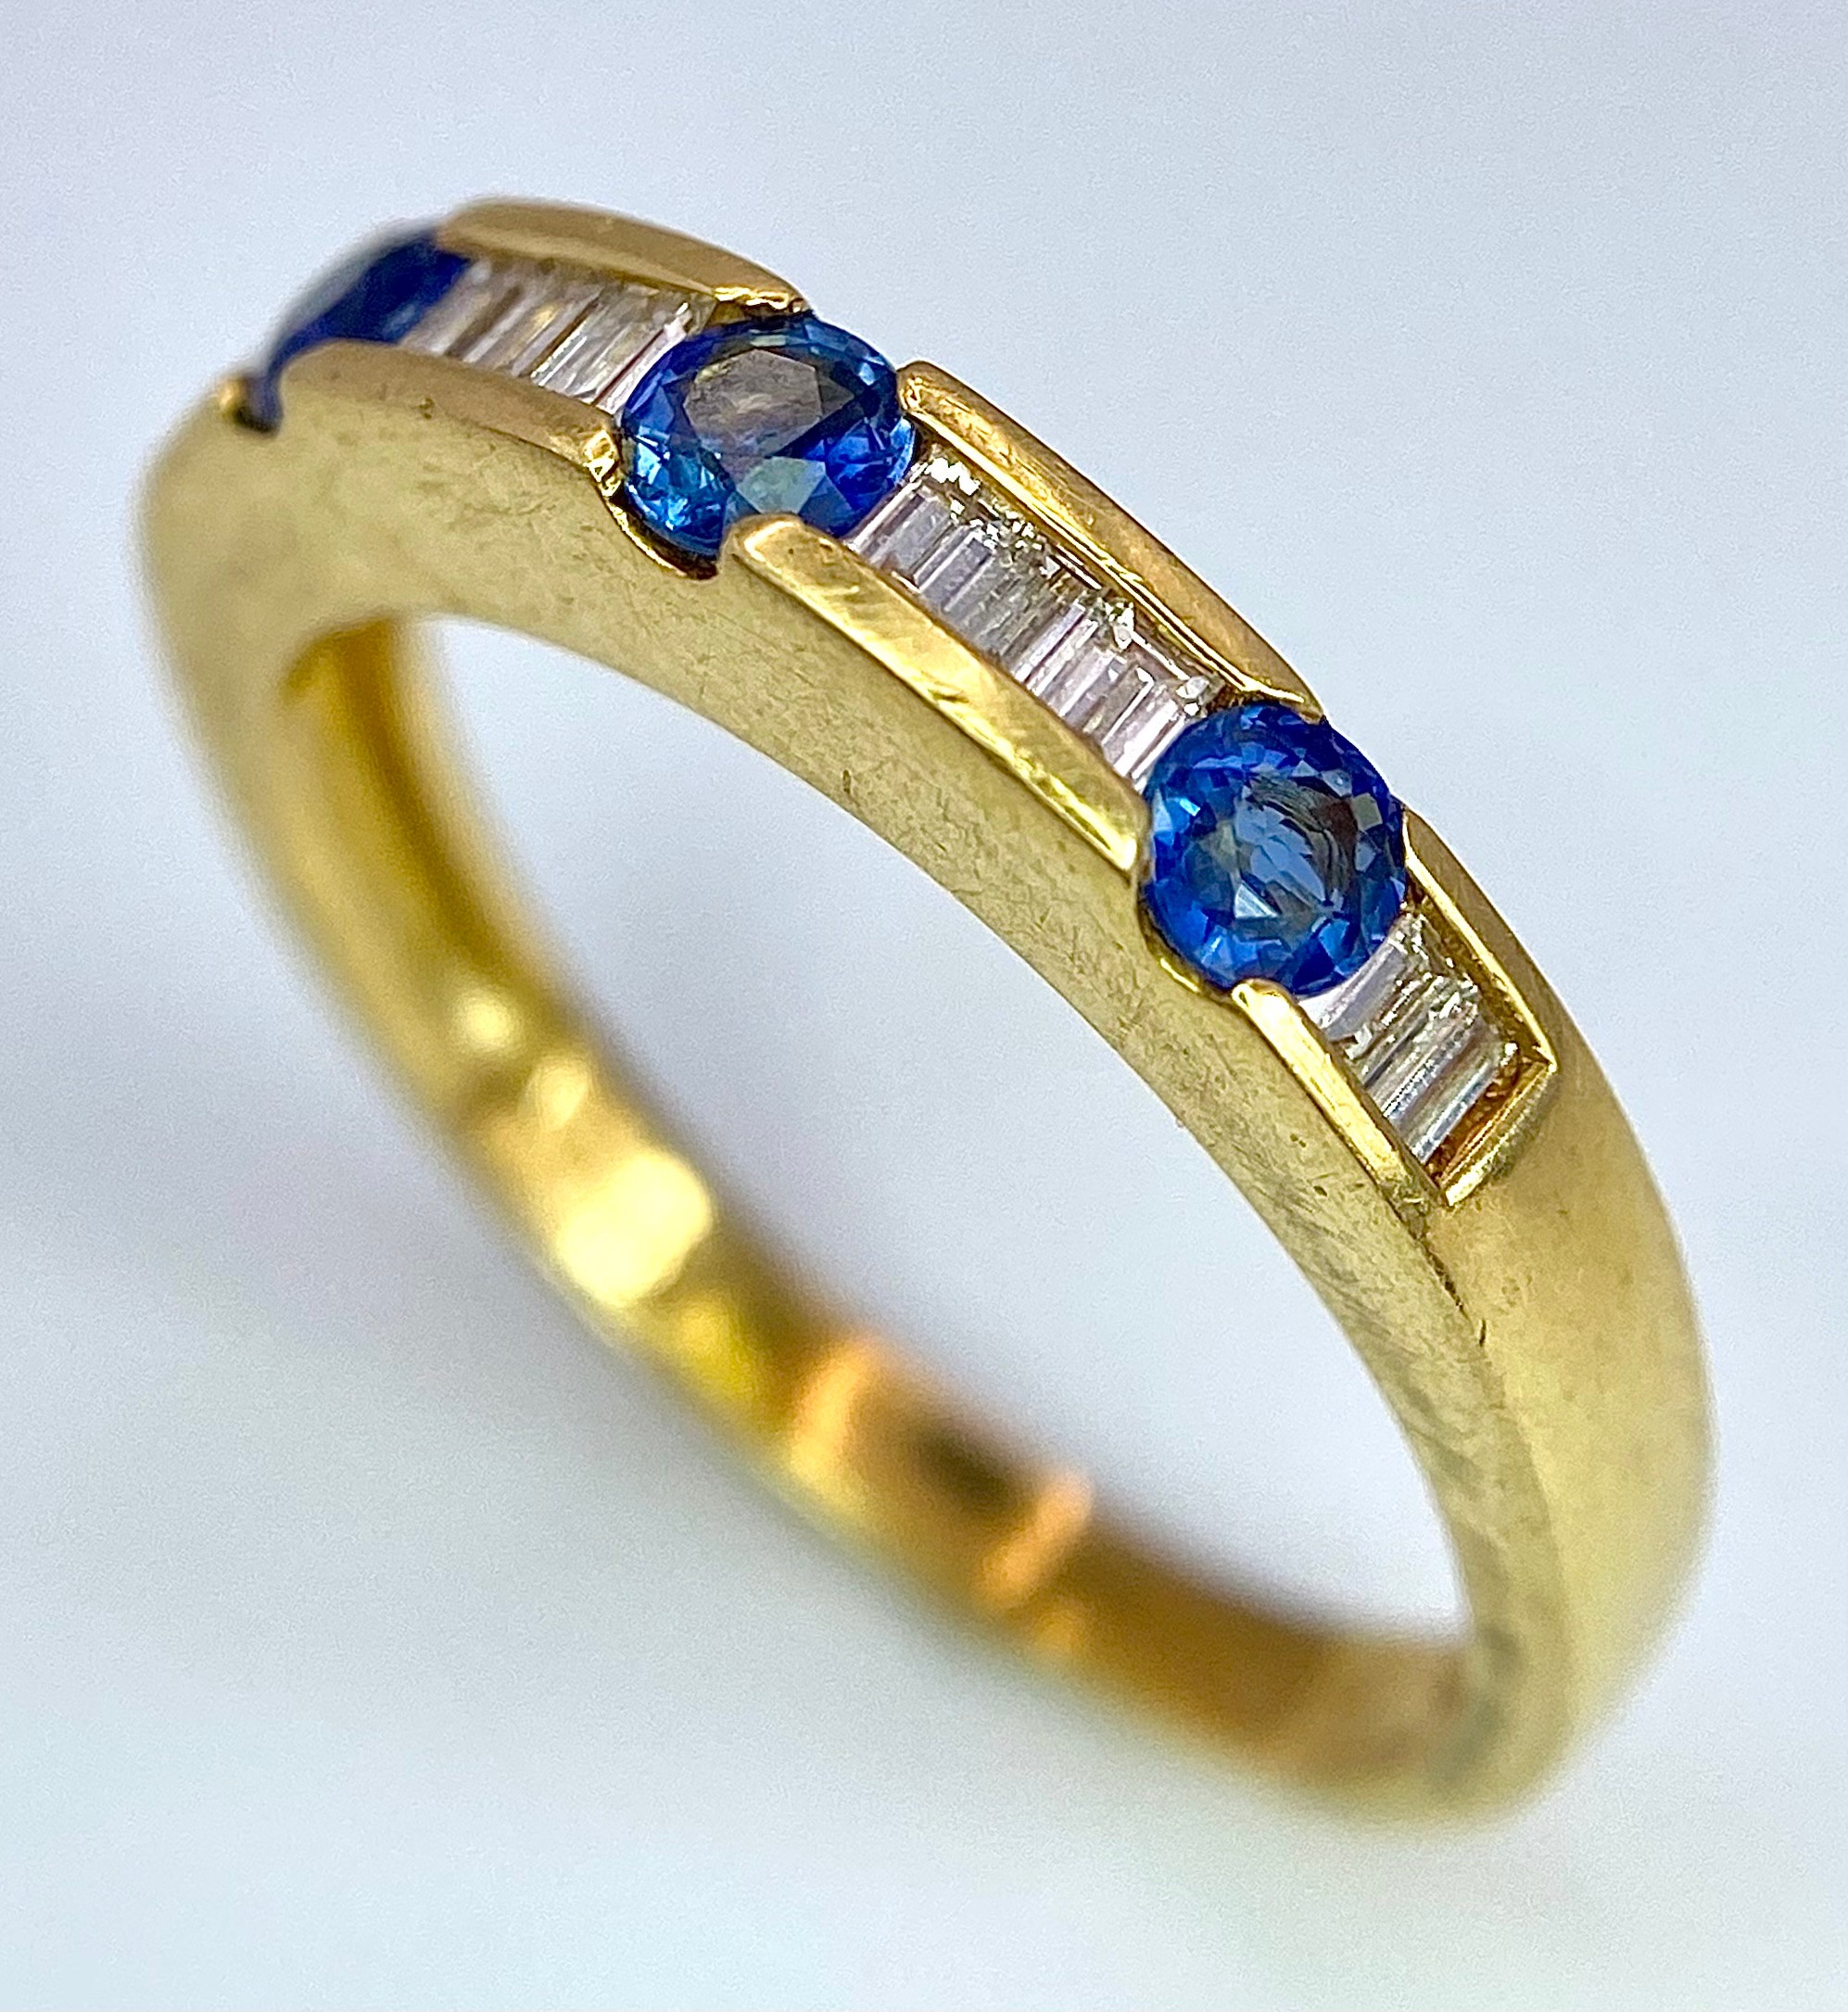 AN 18K YELLOW GOLD DIAMOND & SAPPHIRE BAND RING. 0.20ctw, size O, 3.6g total weight. Ref: SC 9037 - Image 2 of 7